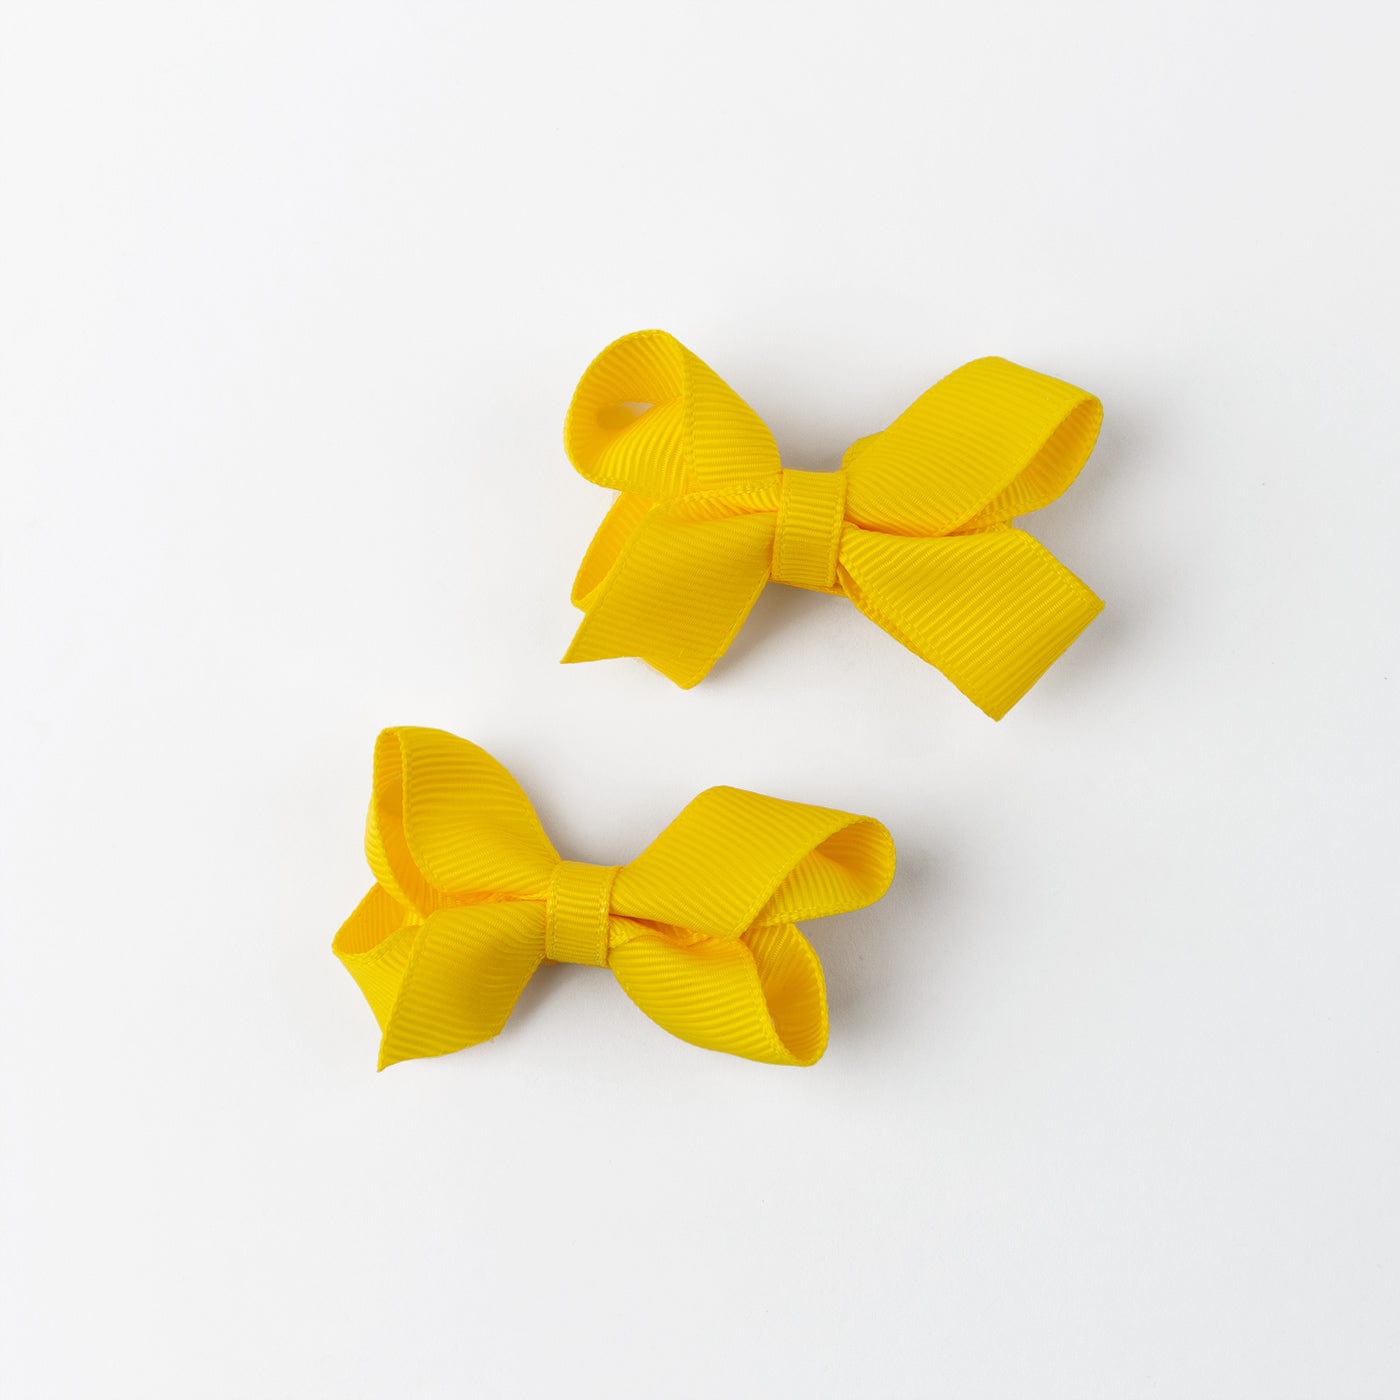 CONGUITOS TEXTIL Accessories Baby's Yellow Bow Hairpin Set